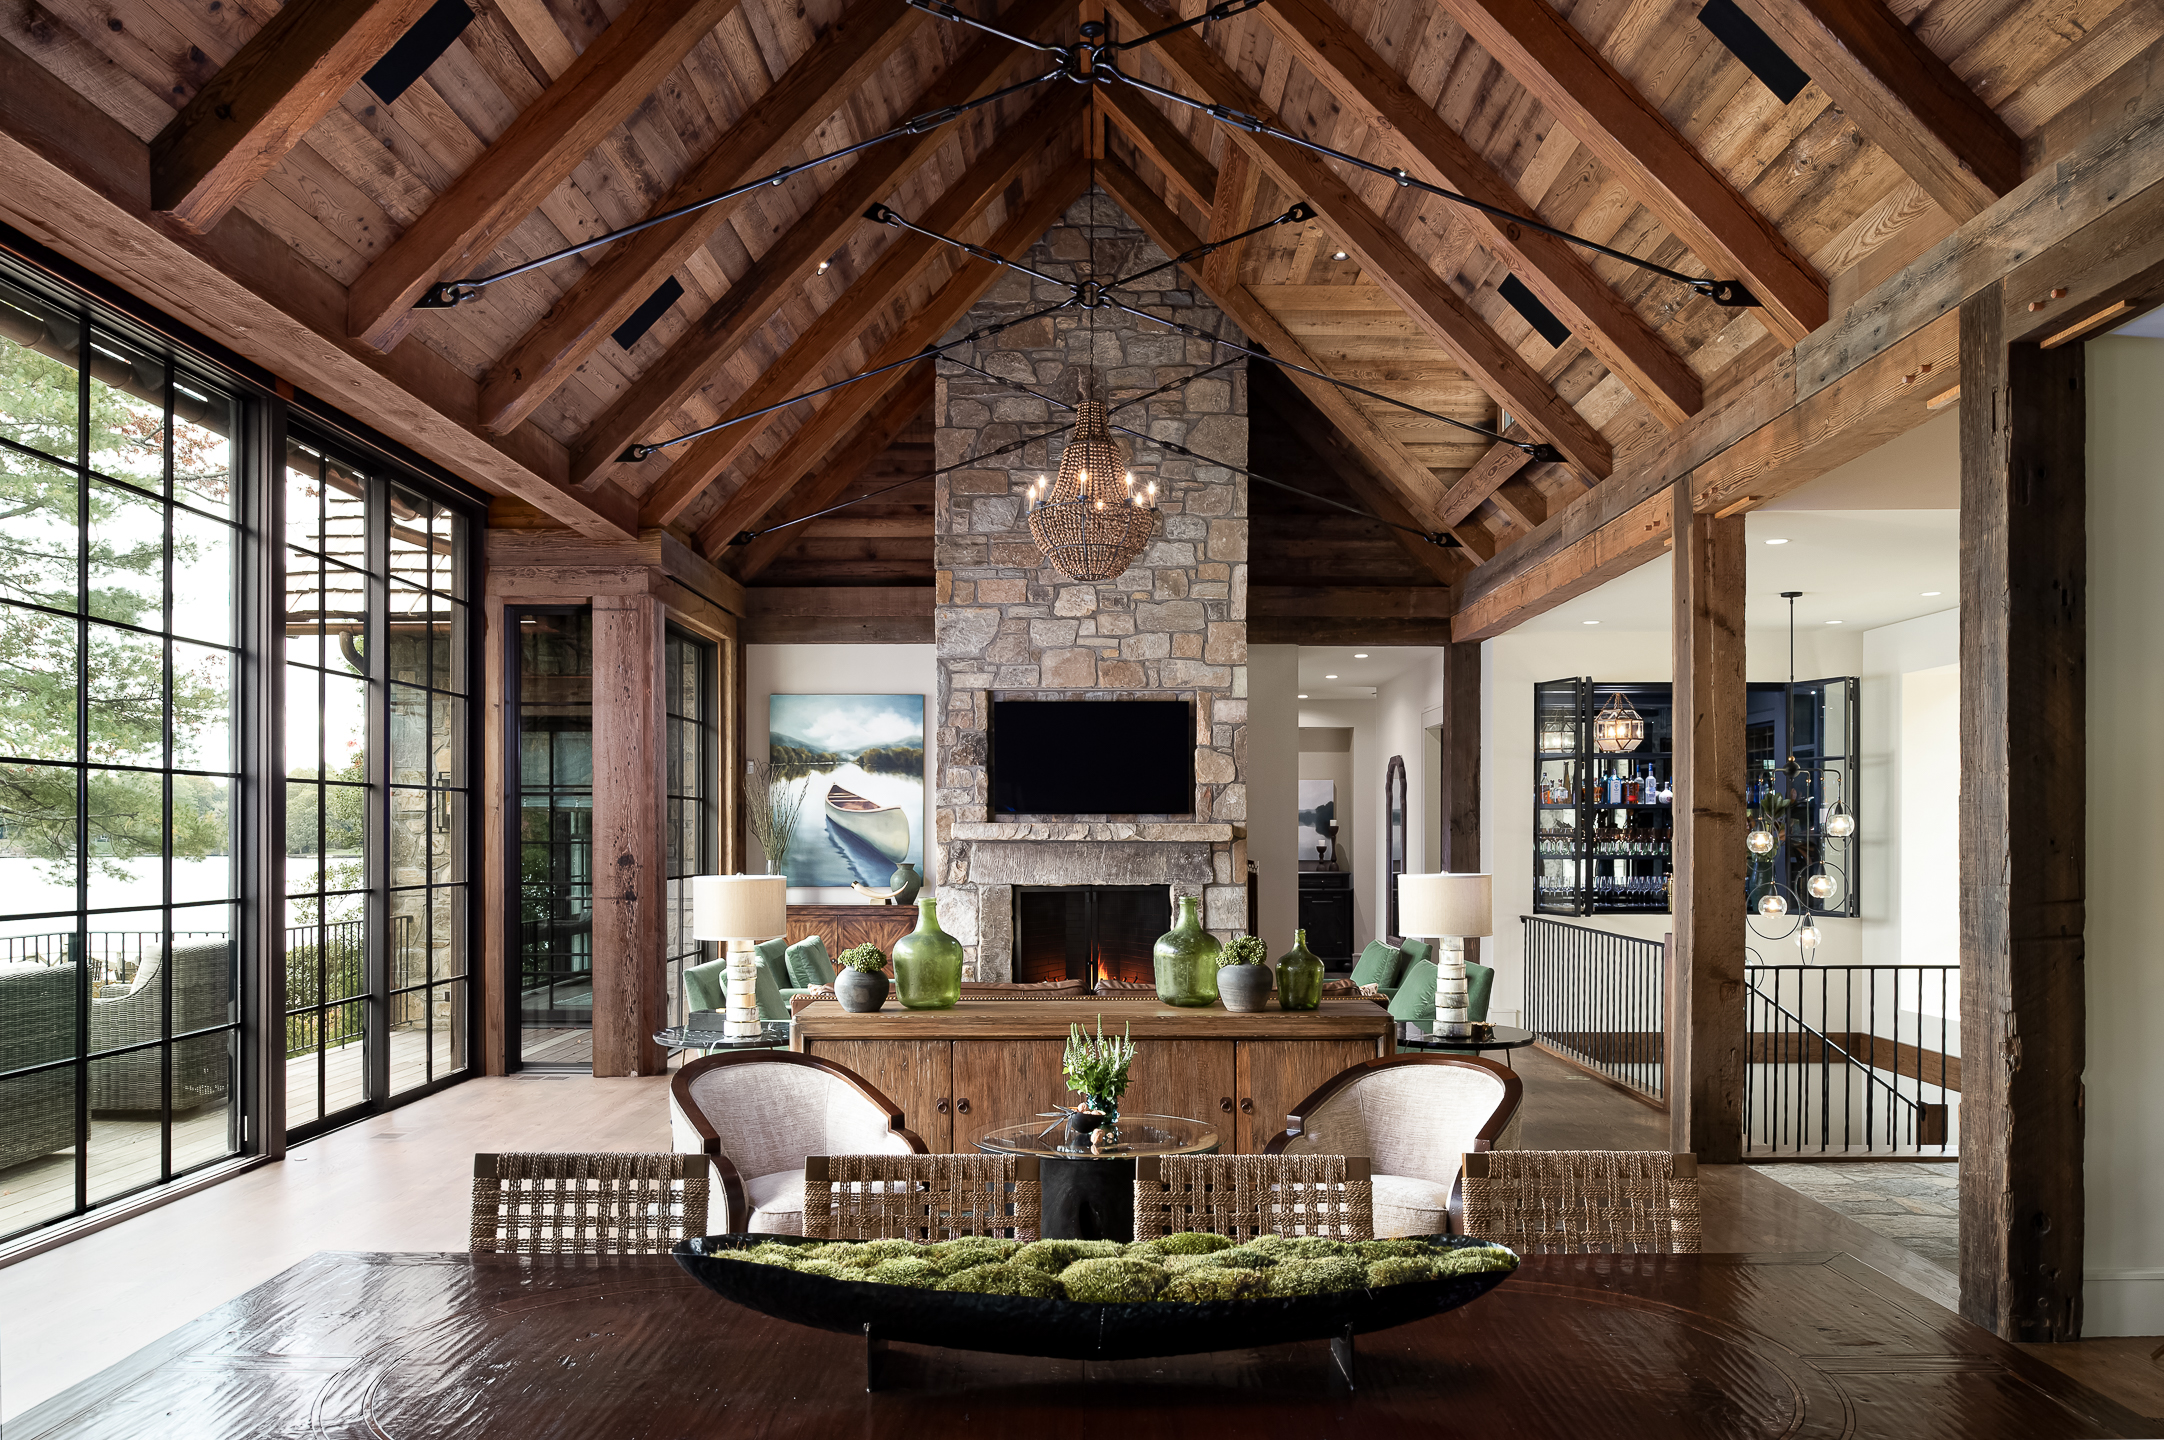 A large living room with wood beams and a fireplace. captured by professional architectural photographer Charlotte, North Carolina